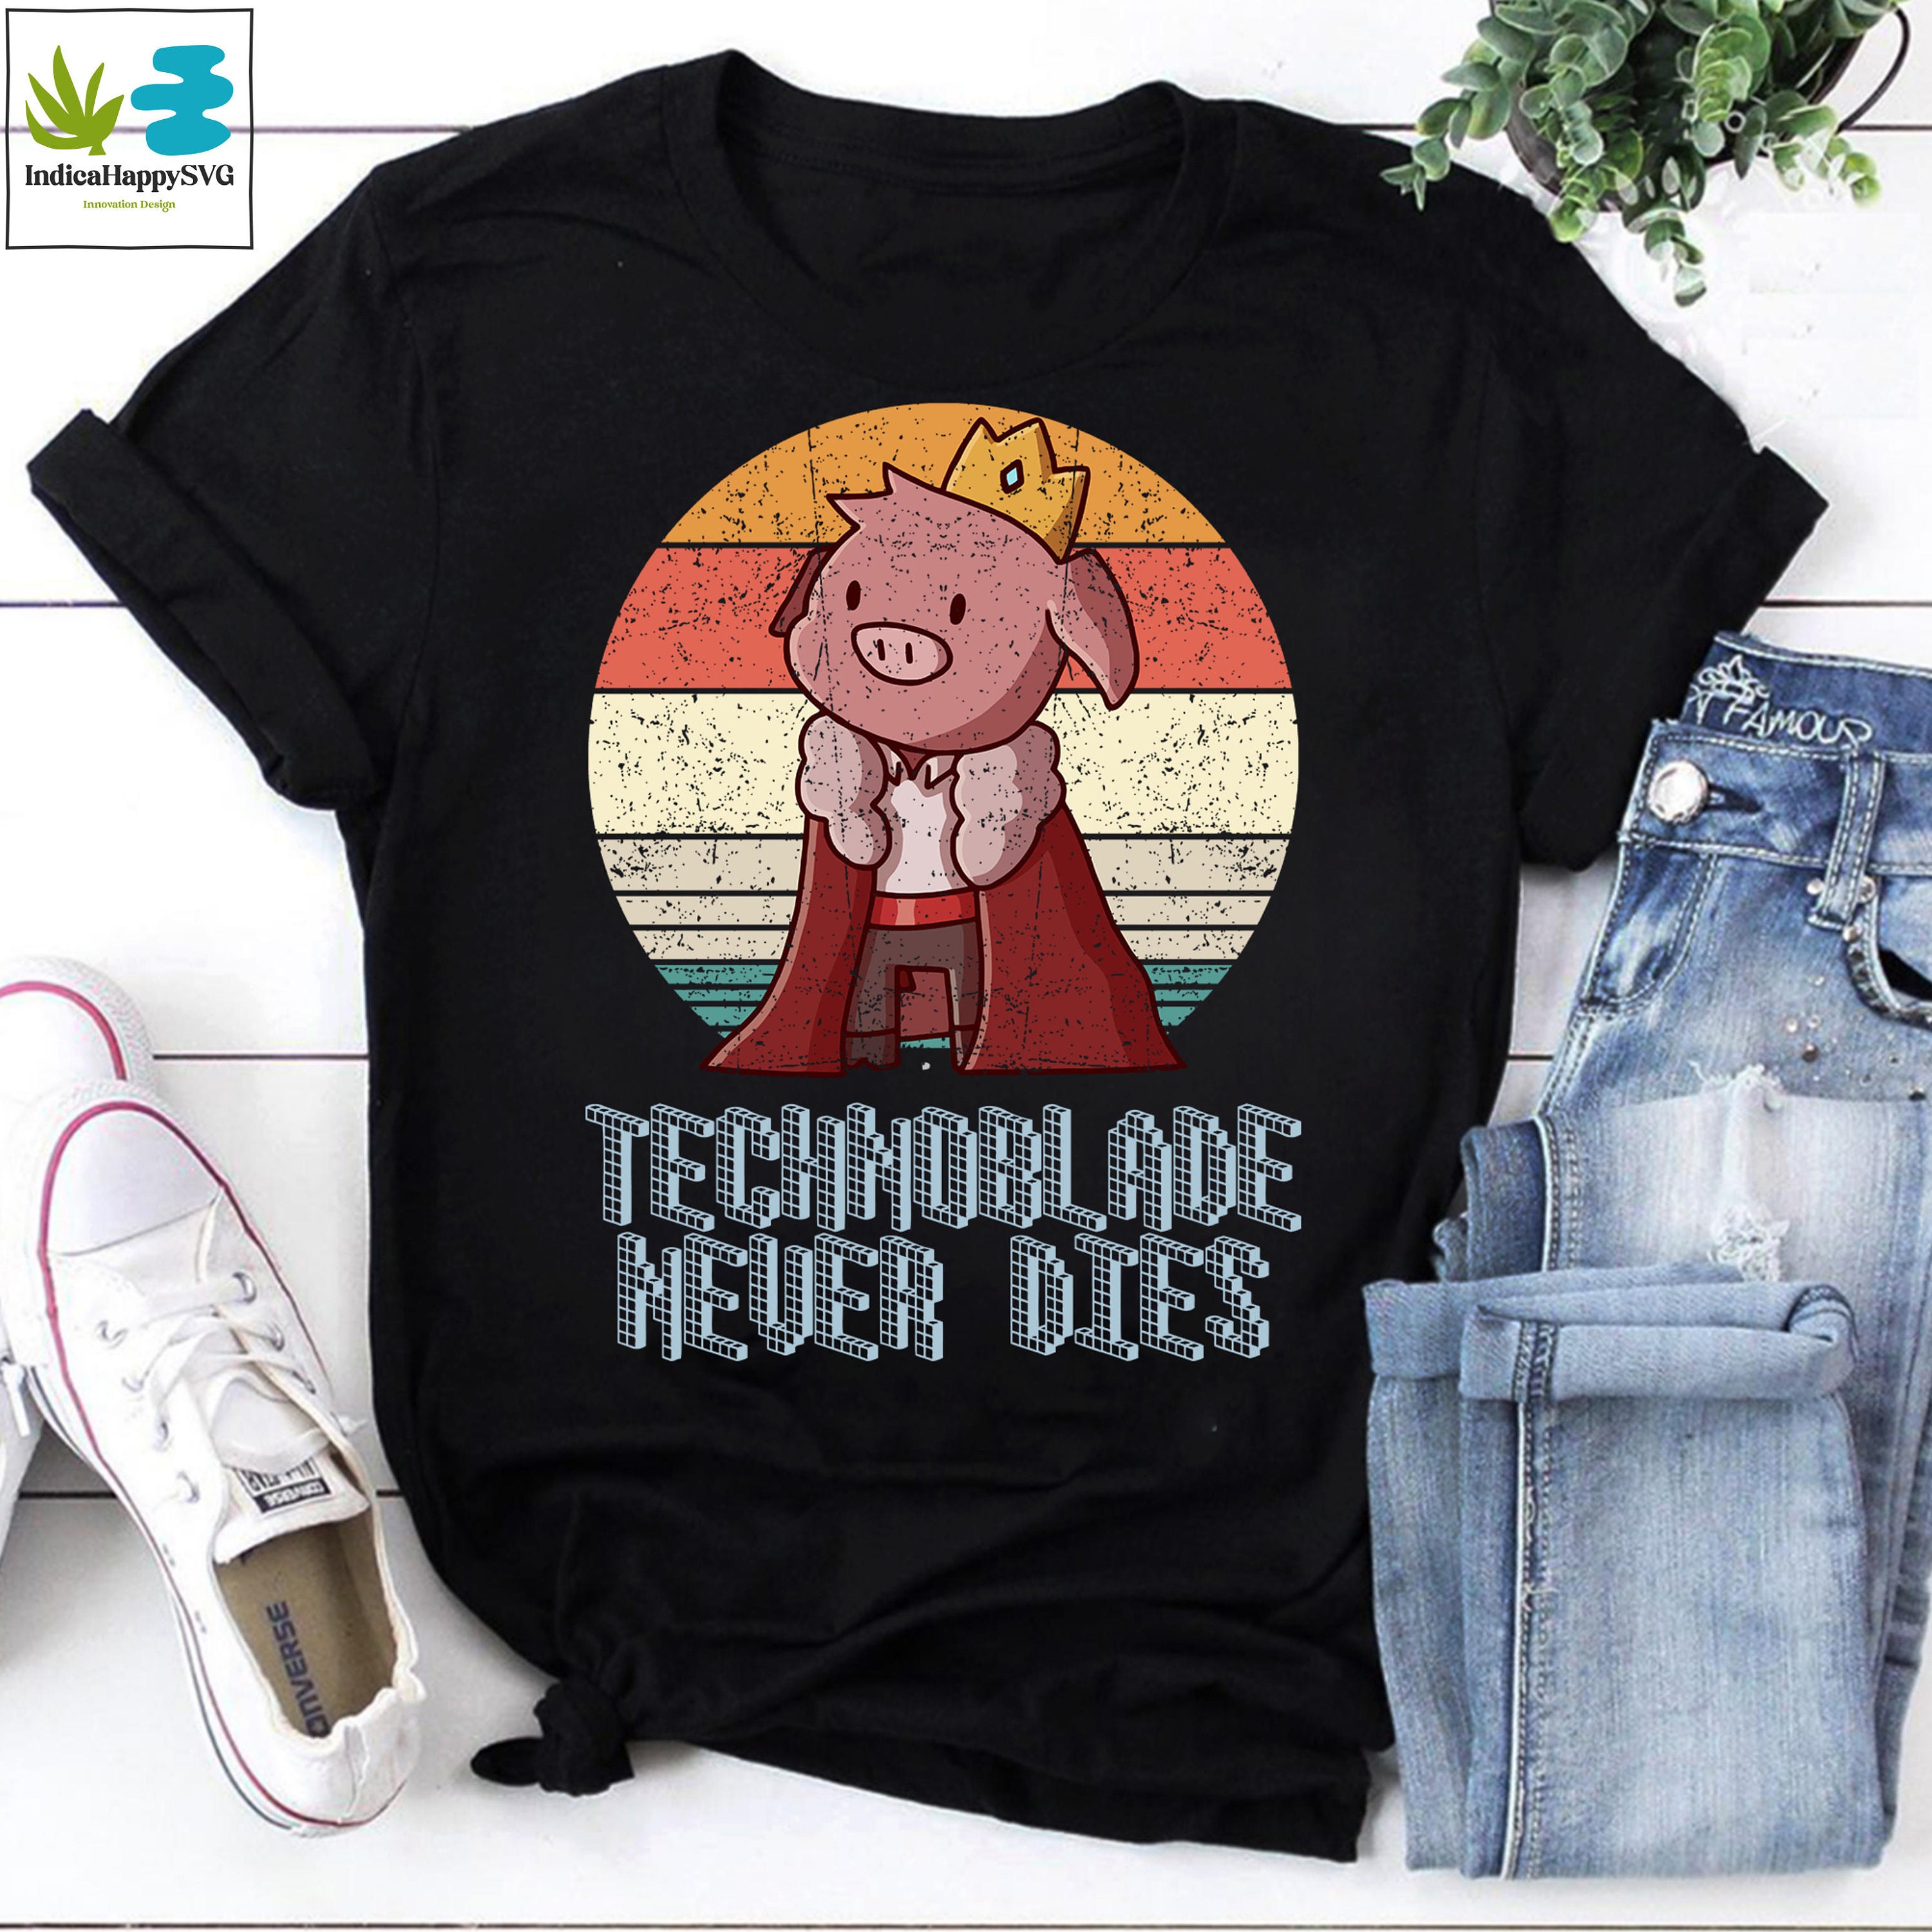  Technoblade Never Dies Funny T-Shirt : Clothing, Shoes